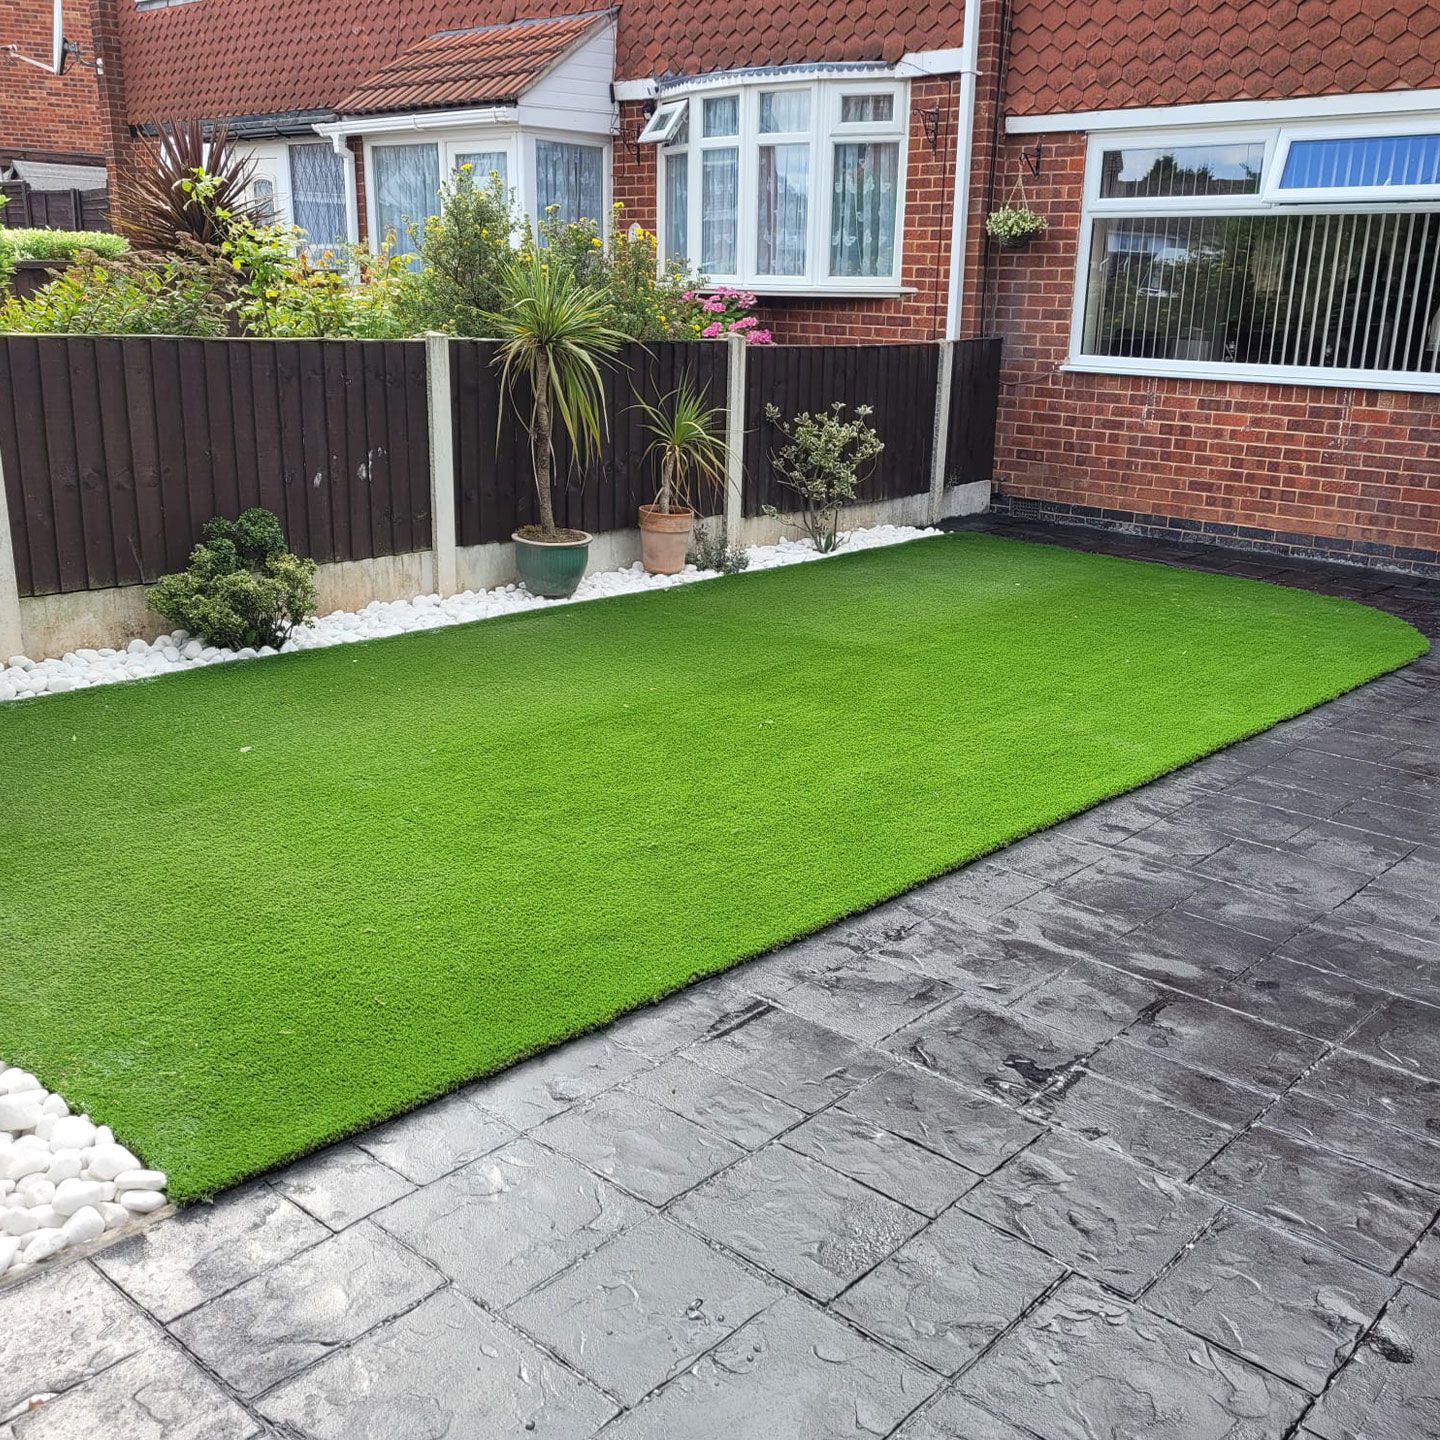 landscaping in Warwick showing new artificial grass and patterned concrete paving